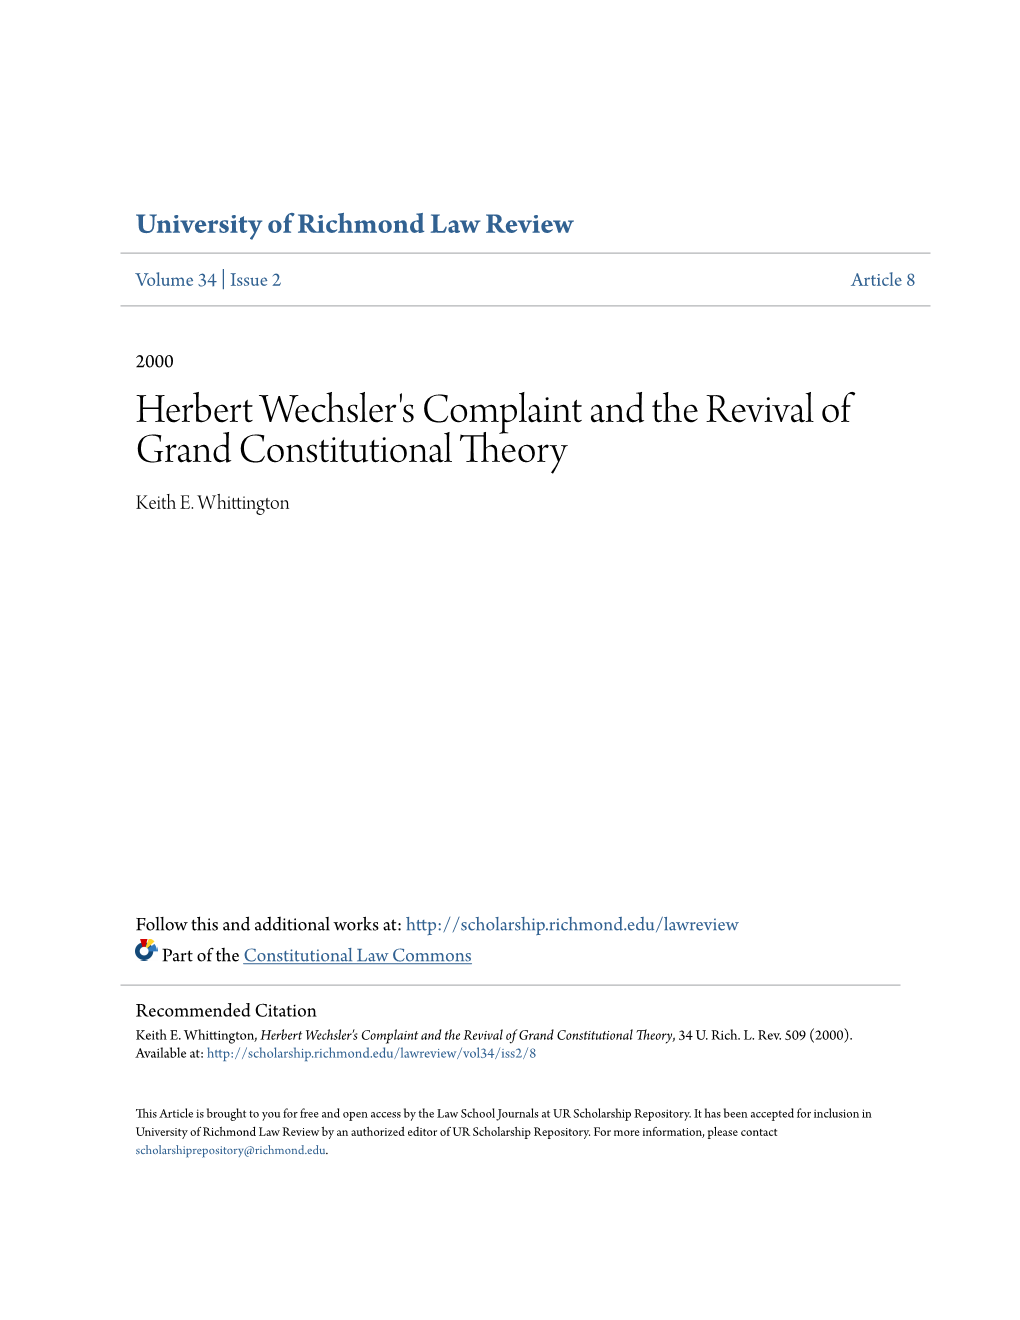 Herbert Wechsler's Complaint and the Revival of Grand Constitutional Theory Keith E